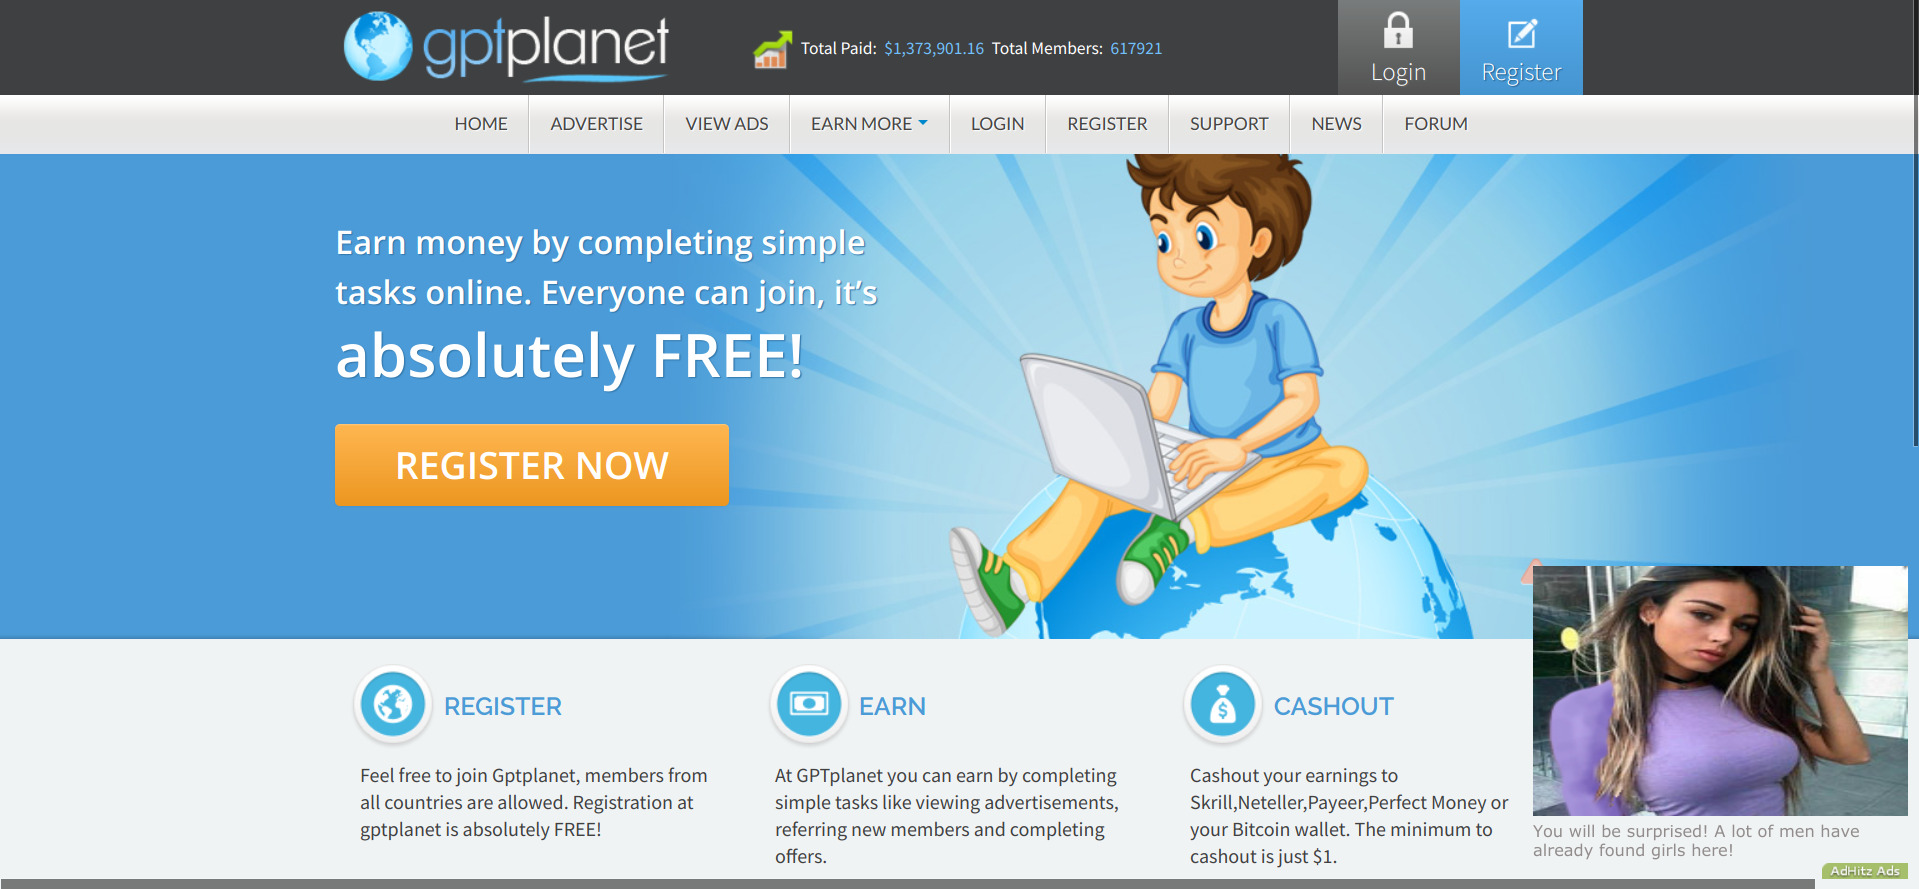 Is GPTPlanet a Scam or Legit